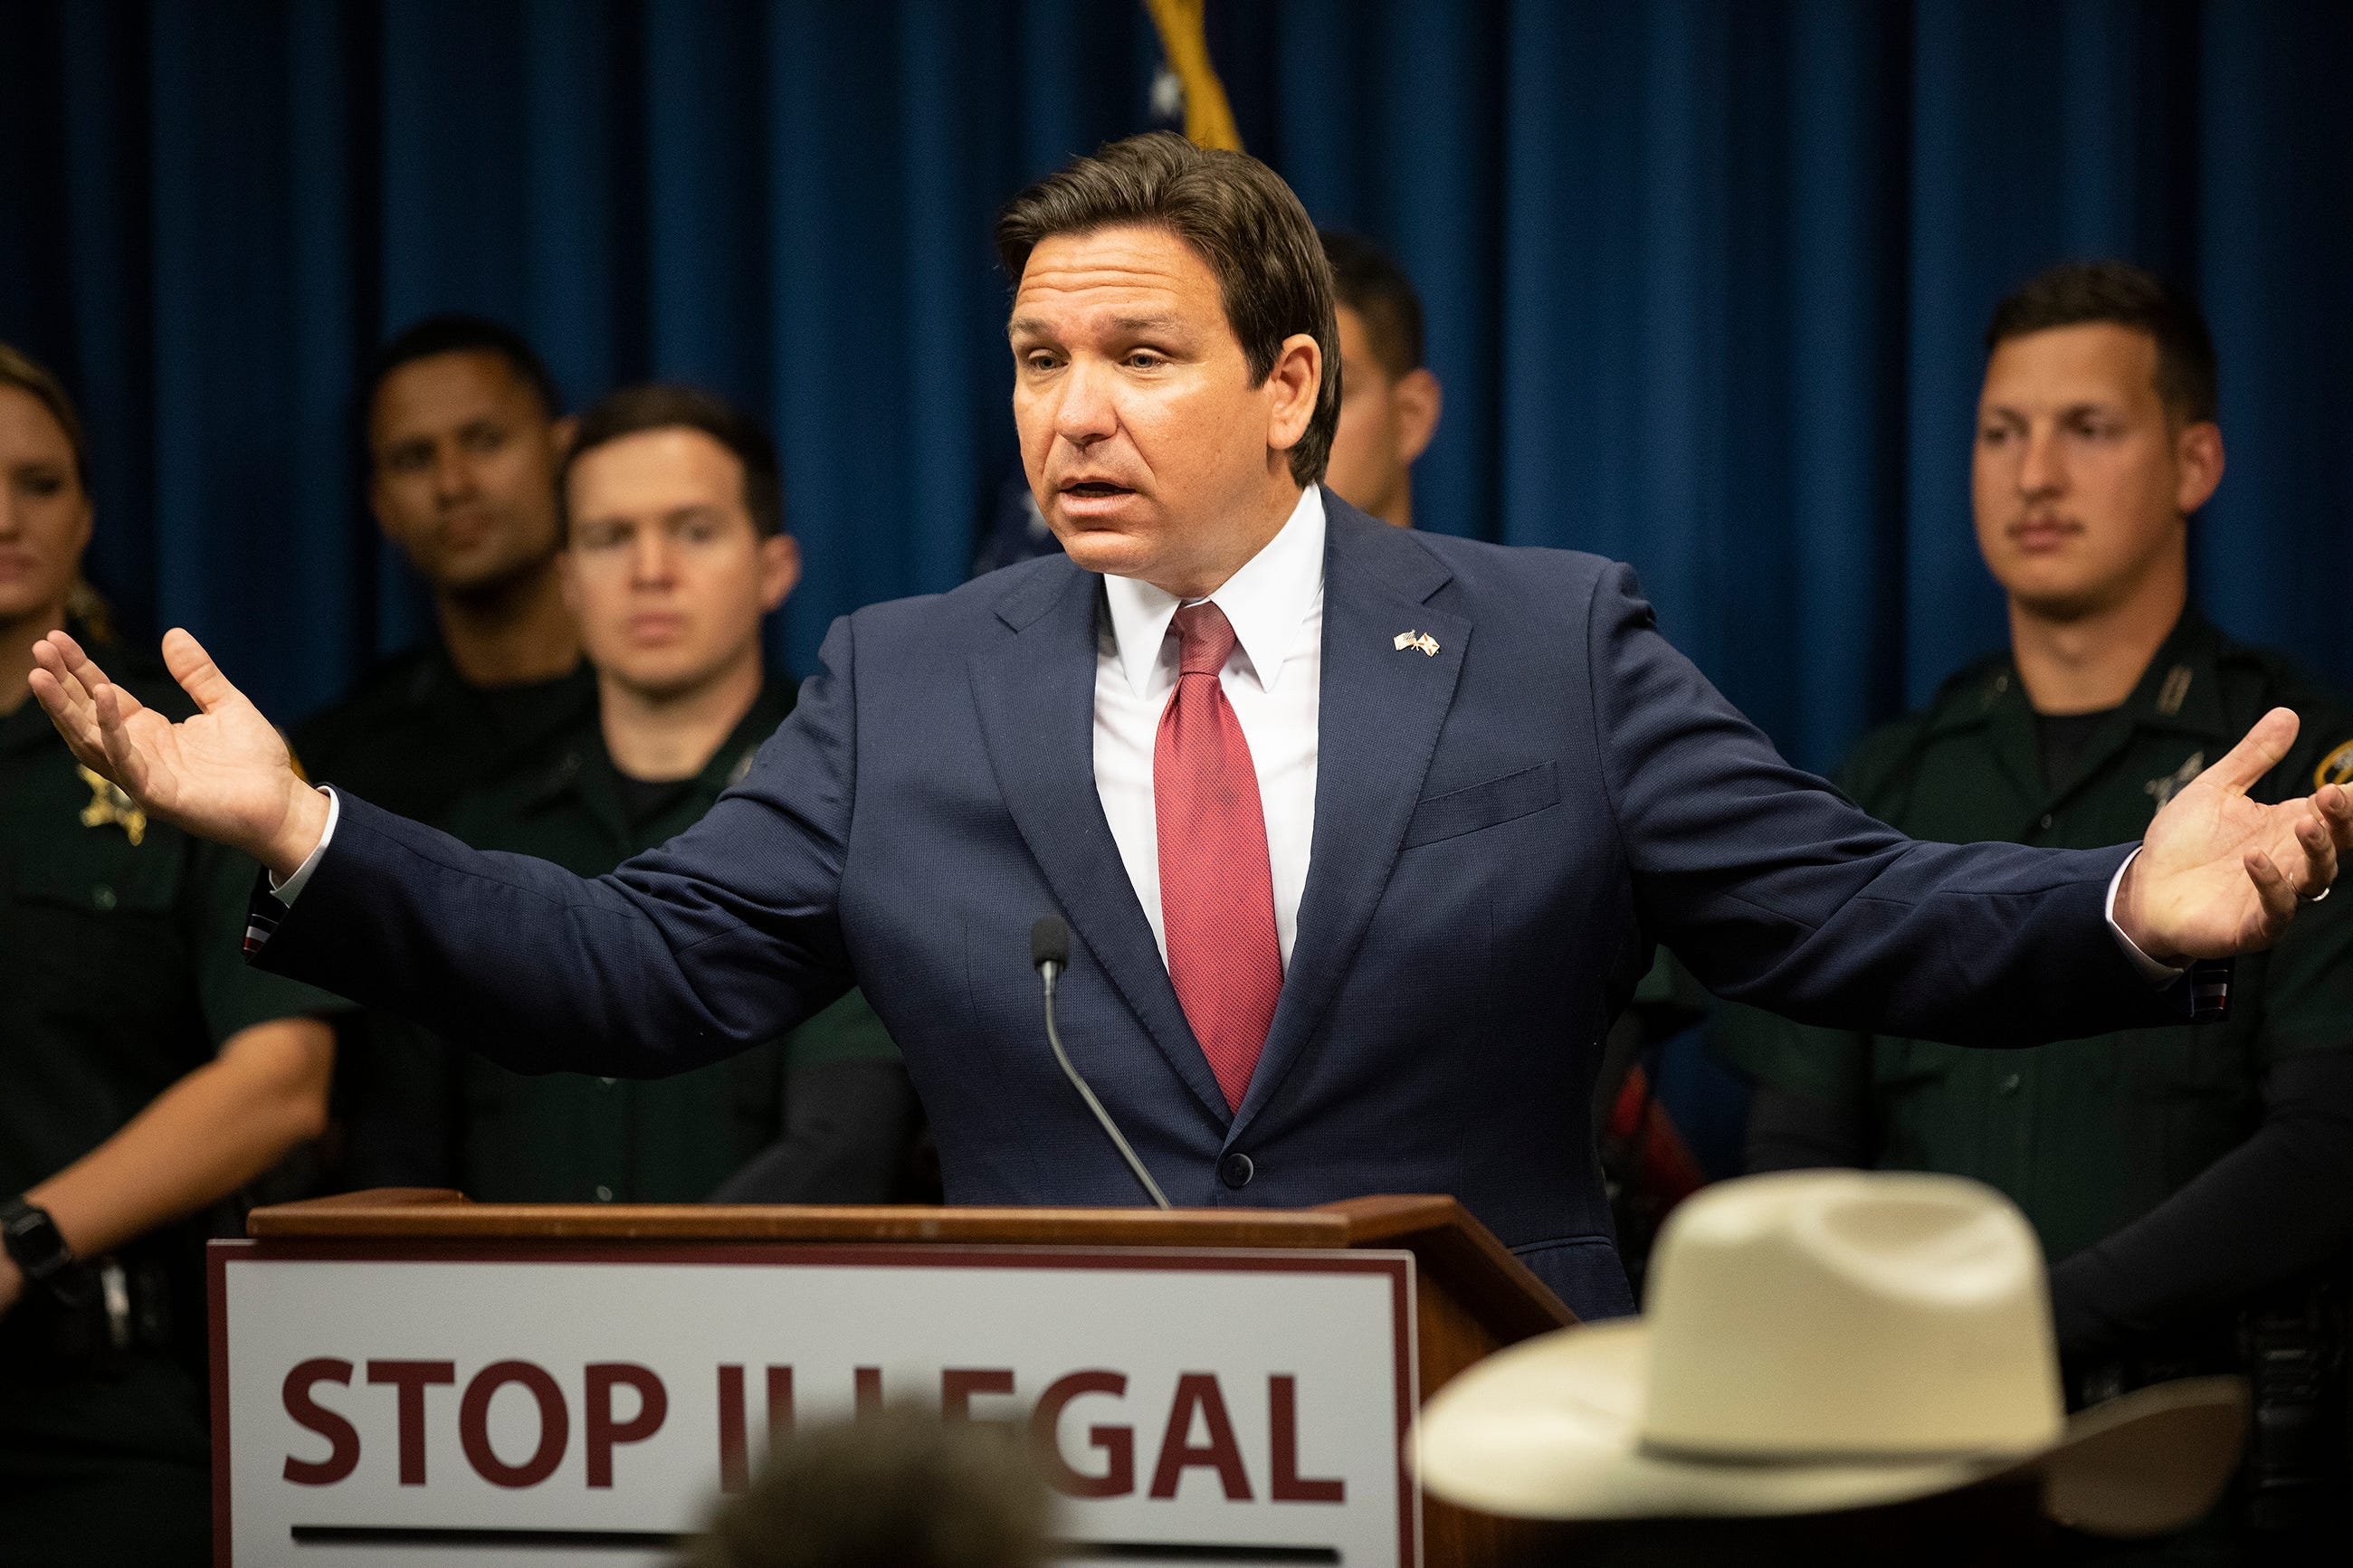 florida latest state to target squatters after desantis signs 'property rights' law